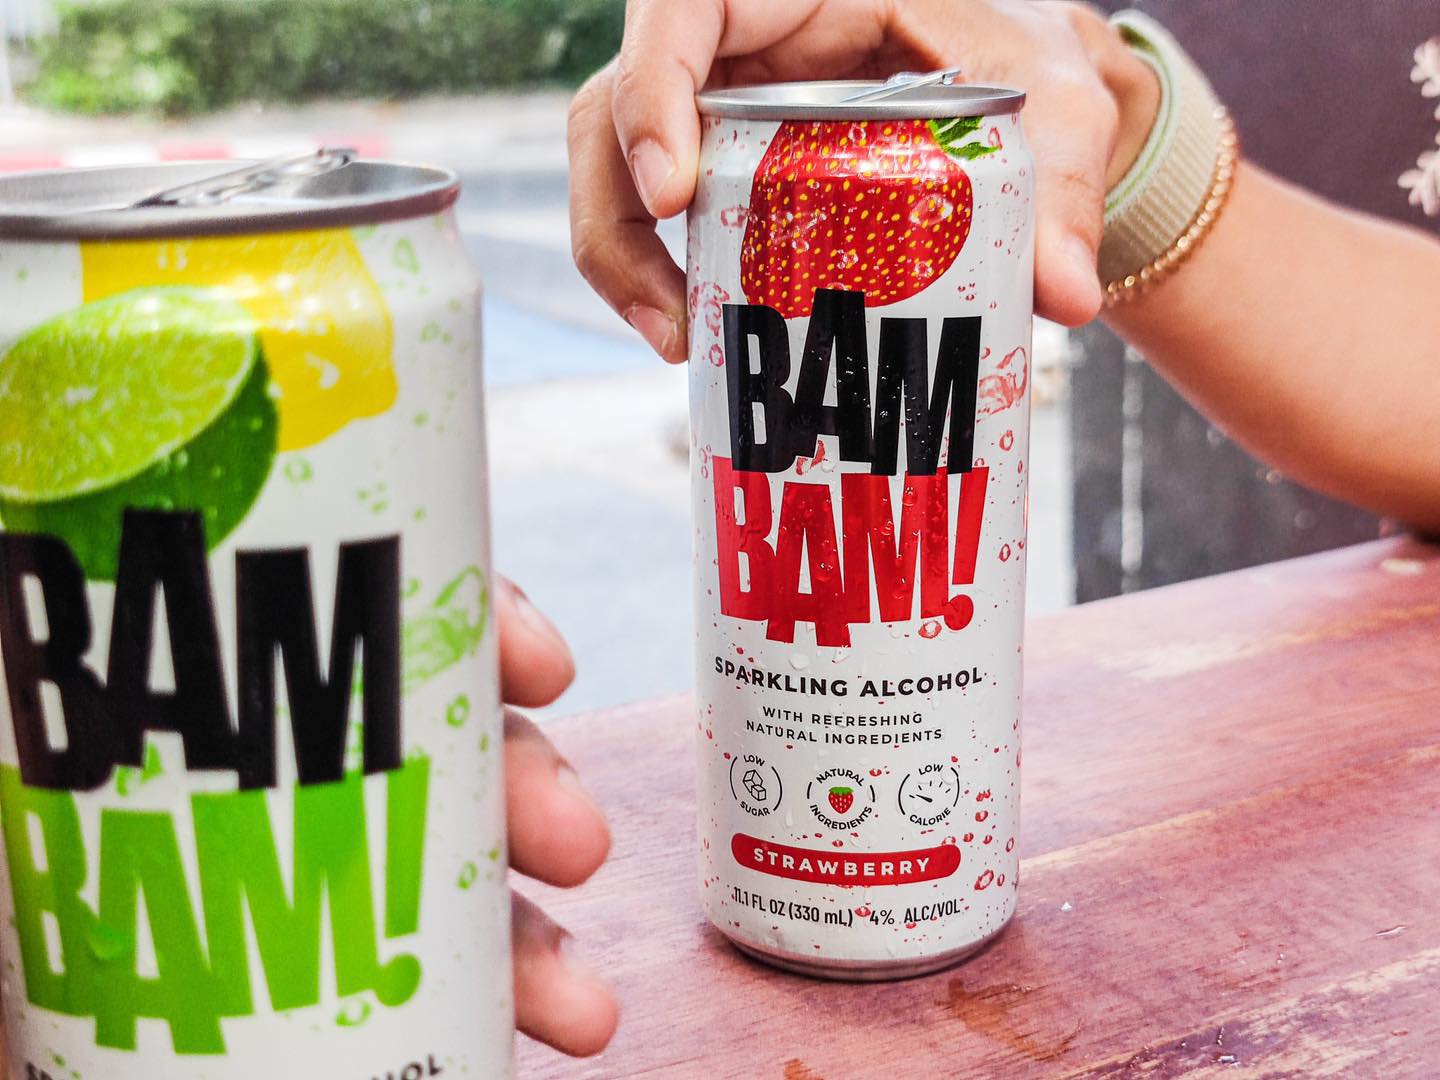 New sparkling alcohol Bam Bam! low in calorie and sugar debuts in ...